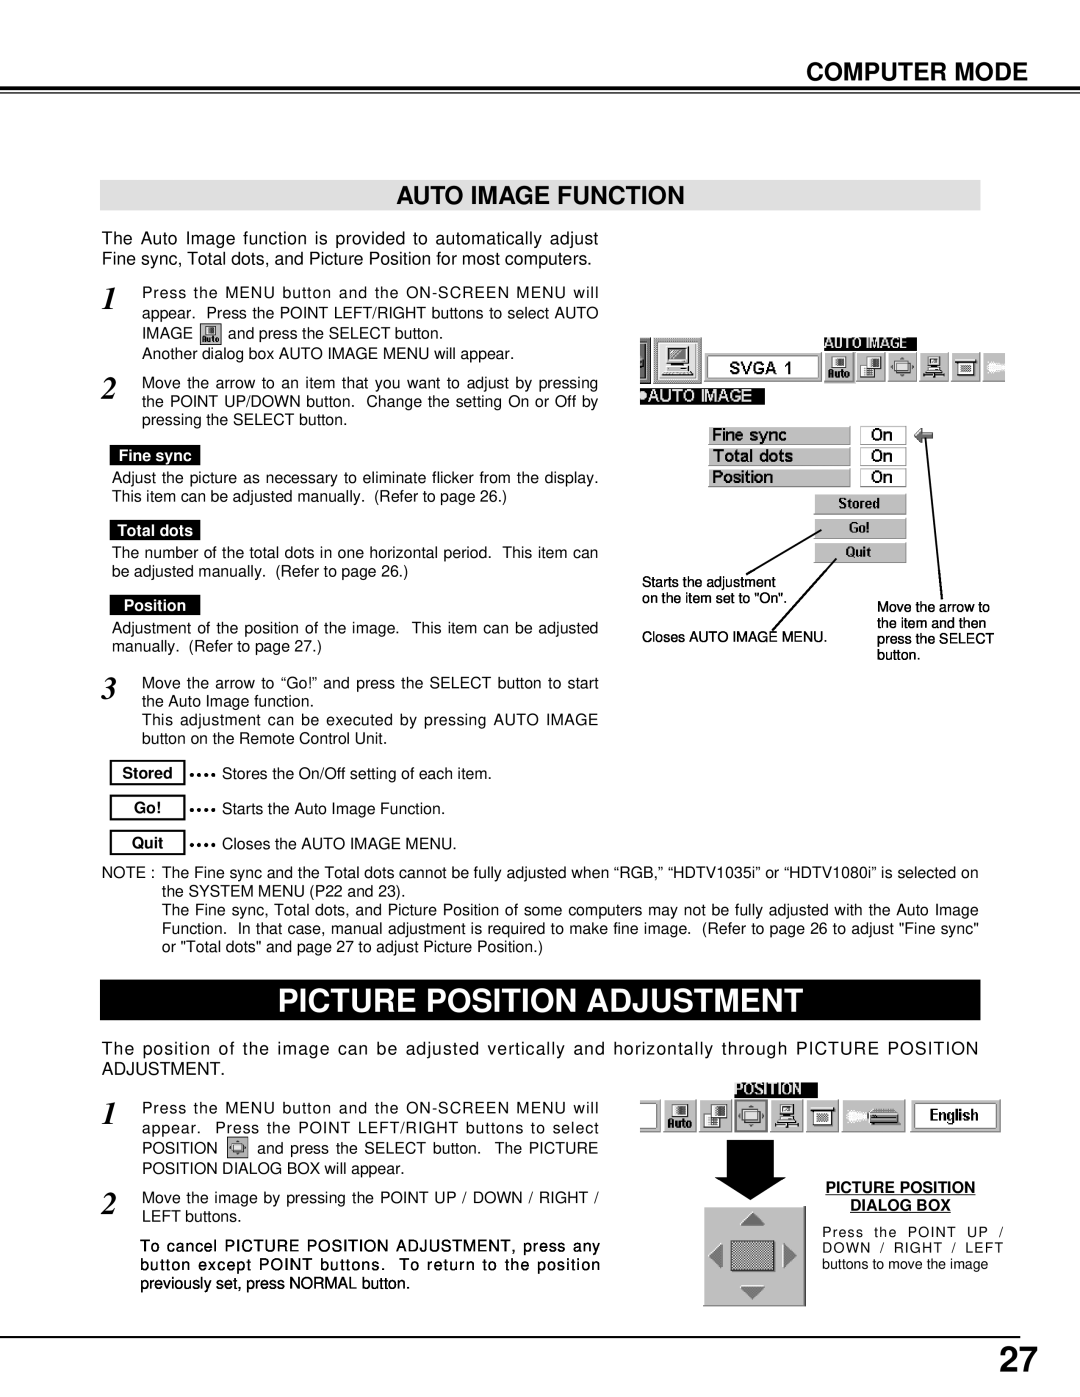 Canon 5100 owner manual Picture Position Adjustment, Computer Mode Auto Image Function, Fine sync, Total dots 